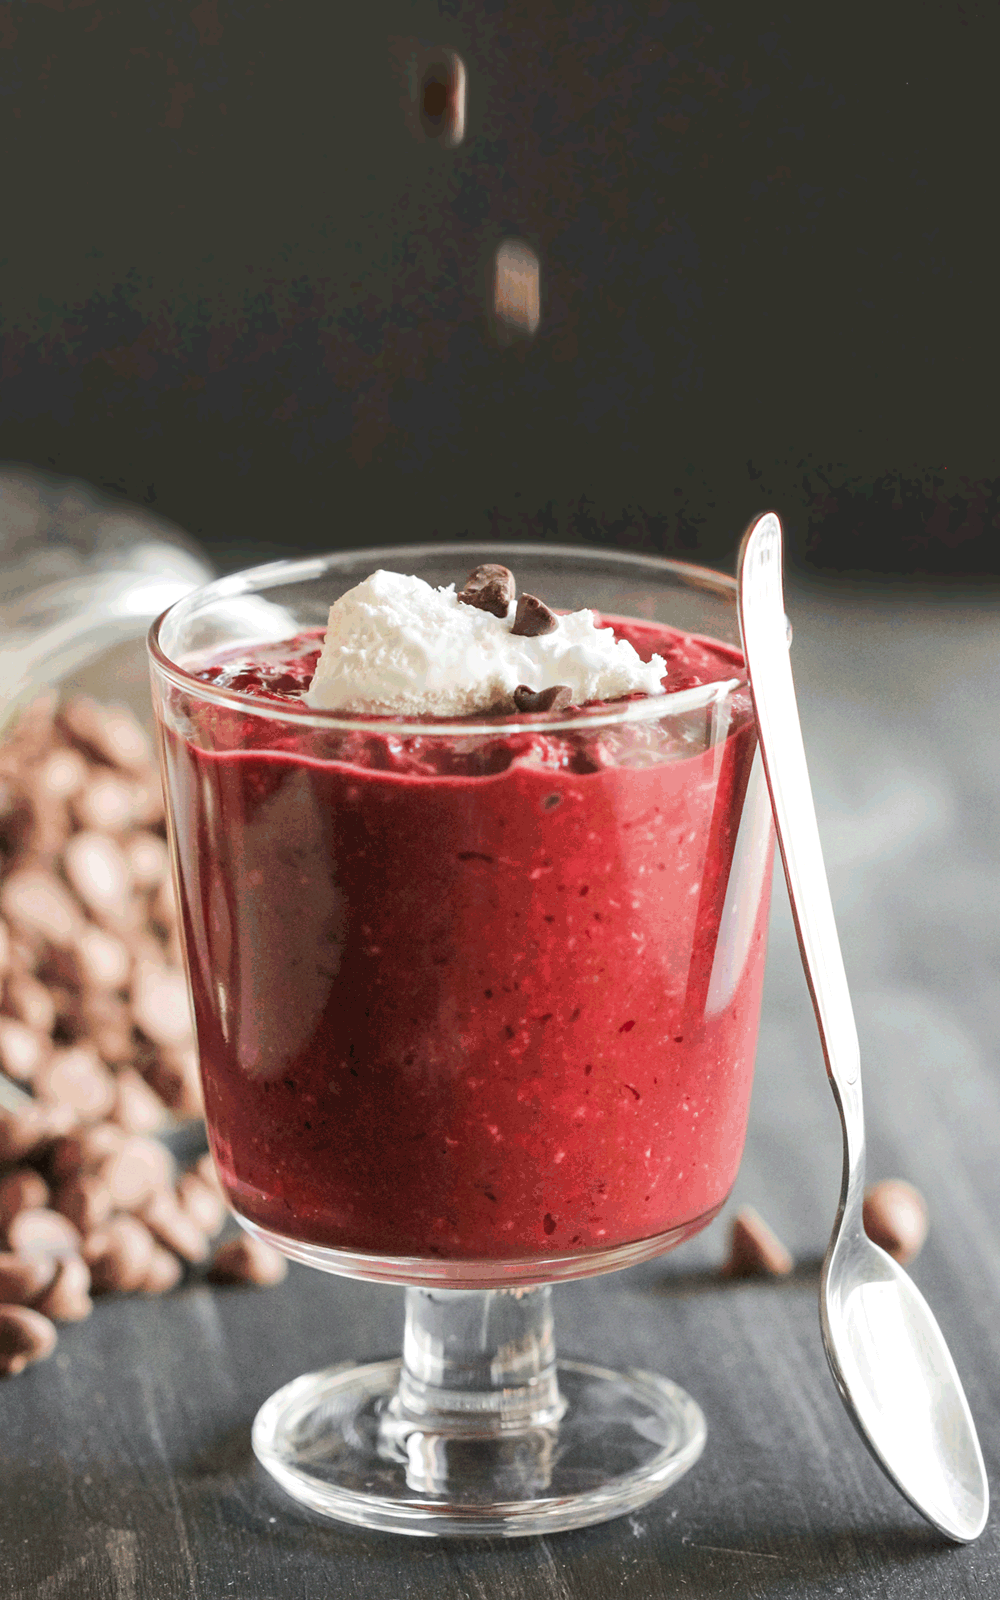 Have dessert for breakfast with these Healthy Red Velvet Overnight Dessert Oats! This single serving recipe is all natural (no artificial food dyes here) sugar free, high fiber, gluten free, dairy free, and vegan. Satisfy your morning sweet tooth while getting in some nutrition! Healthy Dessert Recipes with low calorie, low fat, low carb, and high protein options at the Desserts With Benefits Blog.